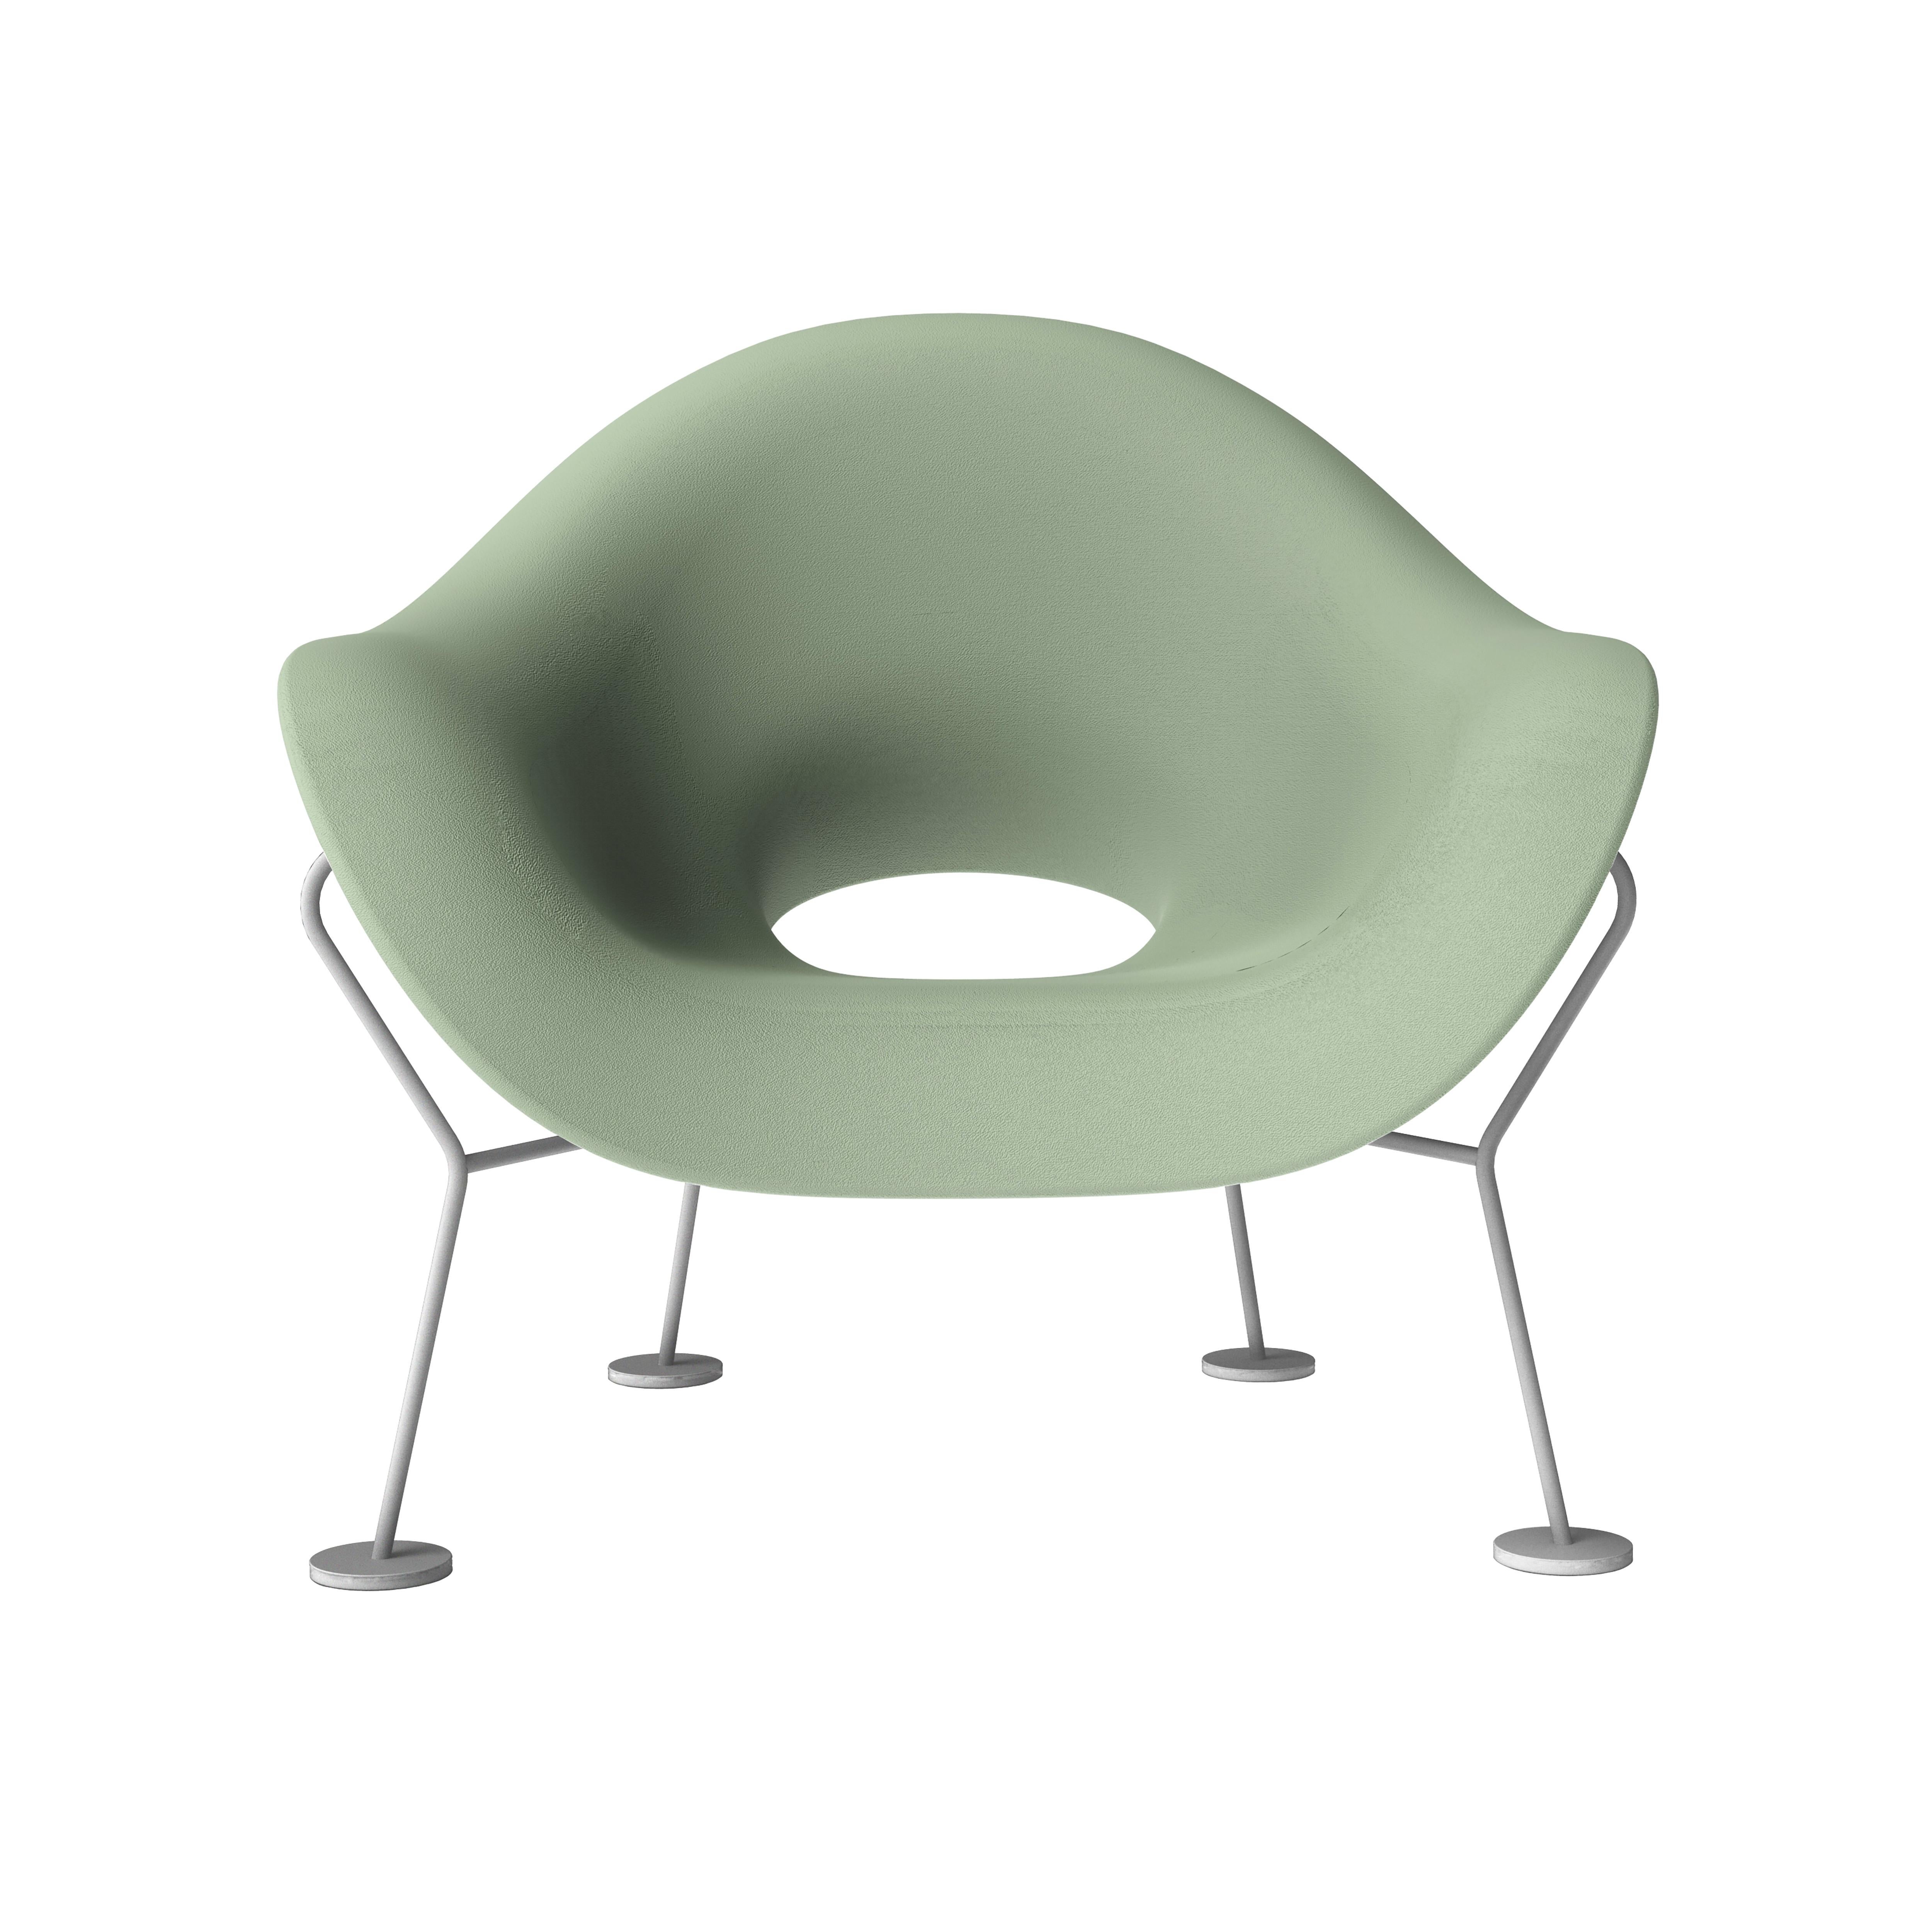 For Sale: Green (Balsam Green) Modern Brass Armchair or Dining Chair in Black White Green or Pink